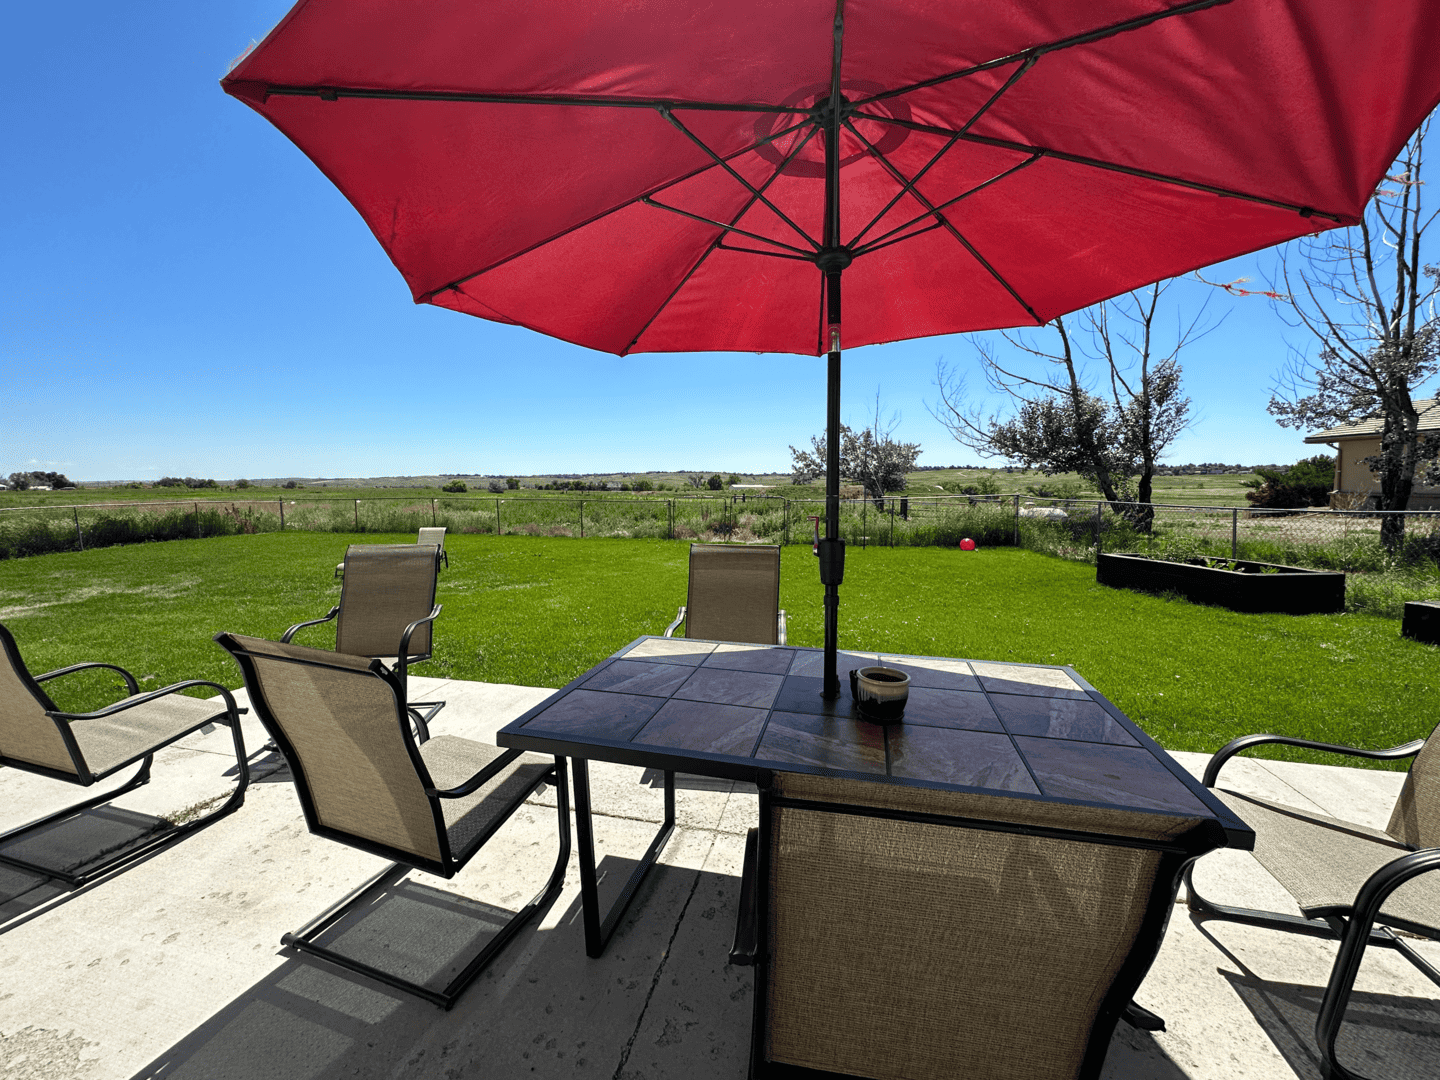 table with red umbrella on outdoor patio